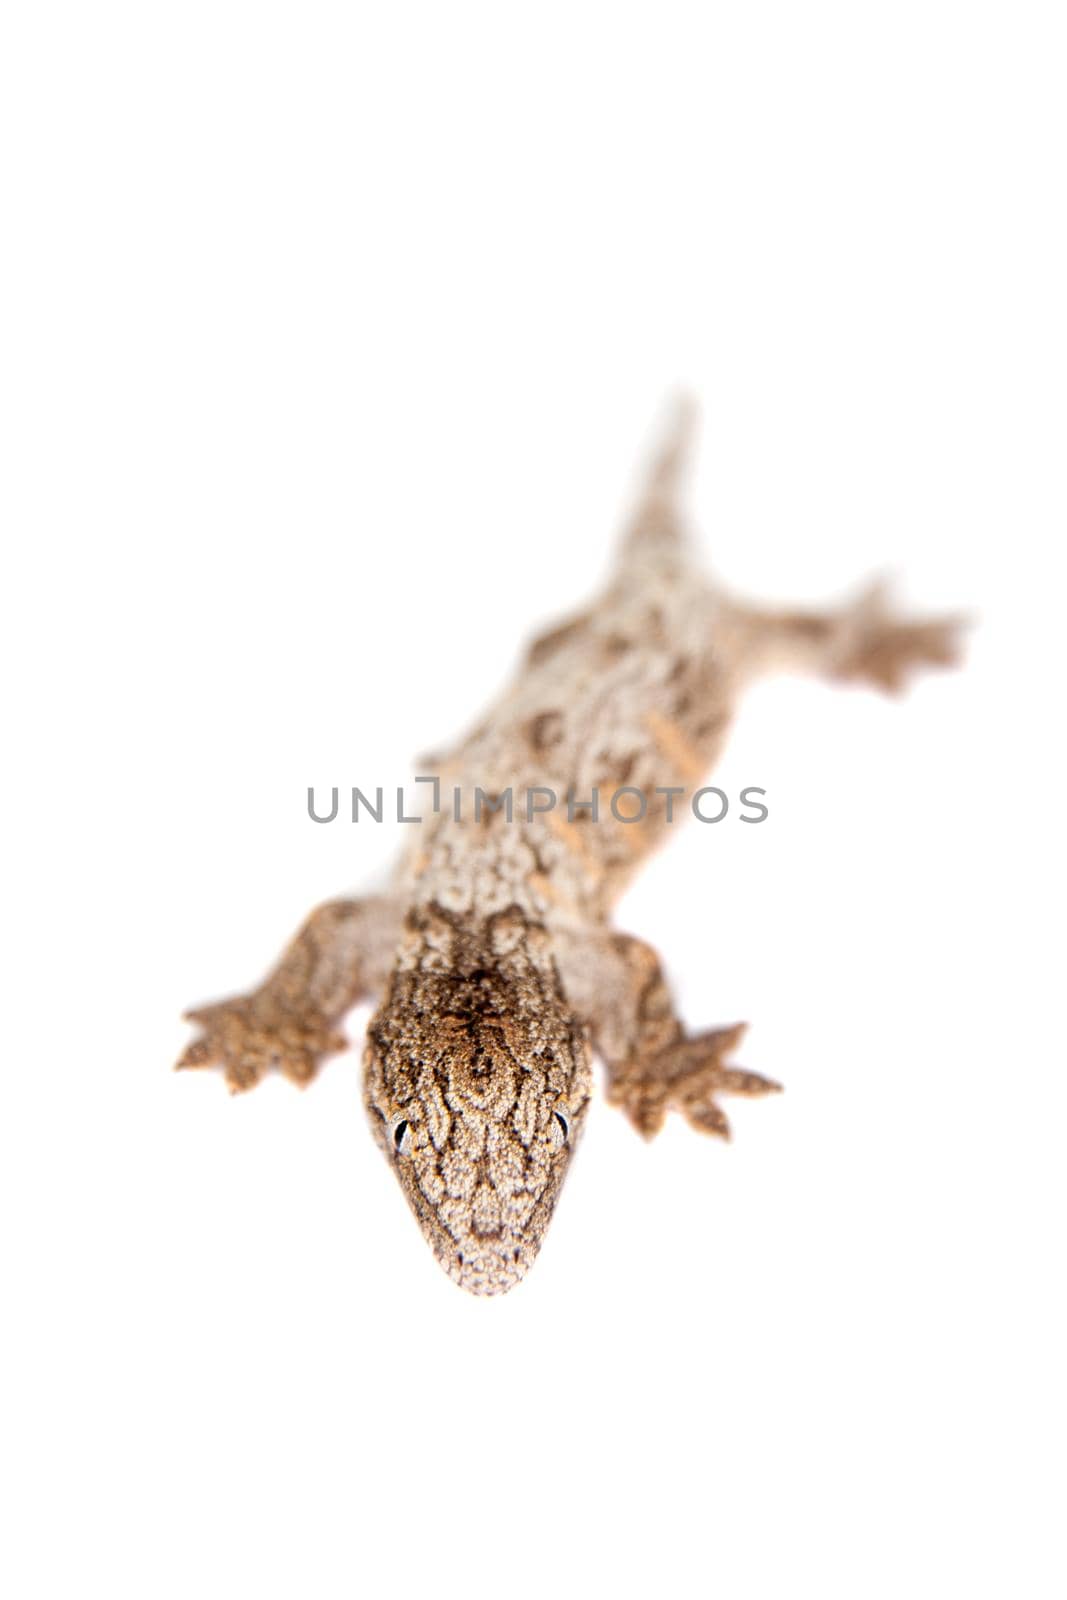 The New Caledonian giant gecko on white by RosaJay